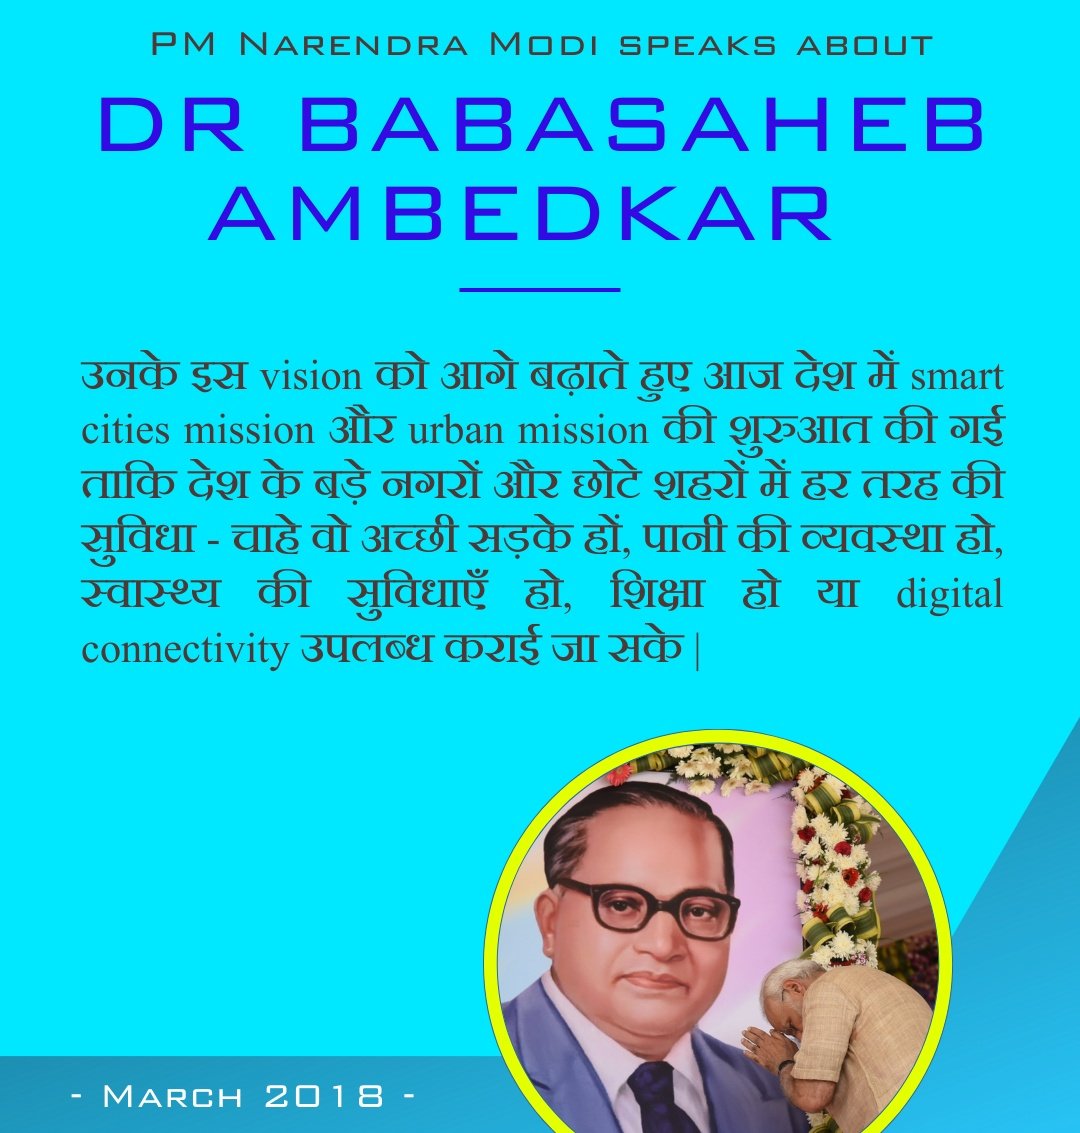 PM @narendramodi speaking about Dr Babasaheb Ambedkar in one of the editions of the #MannKiBaat programme.